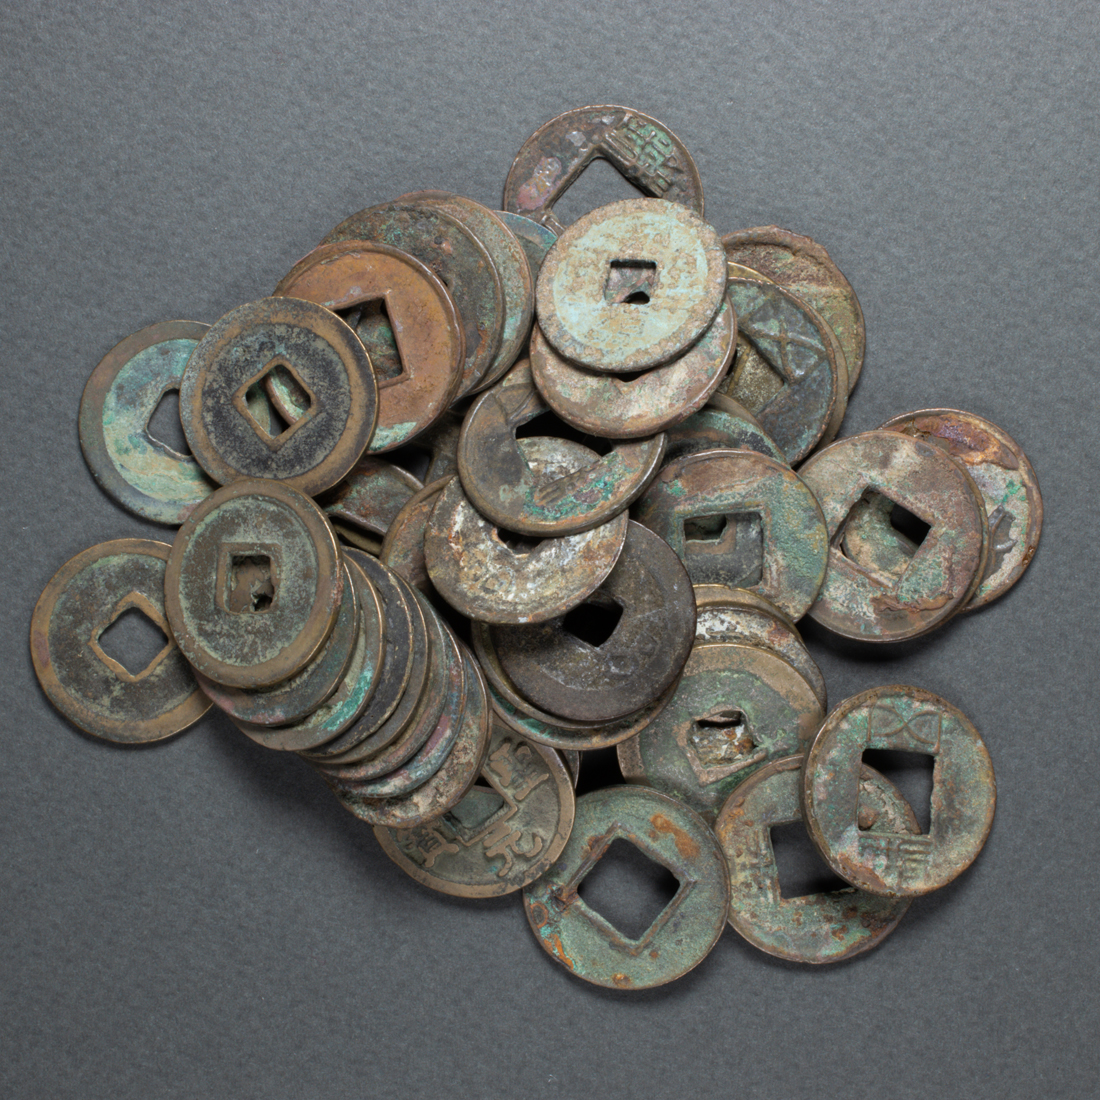 GROUP OF CHINESE BRONZE COINS Group 3a2a04